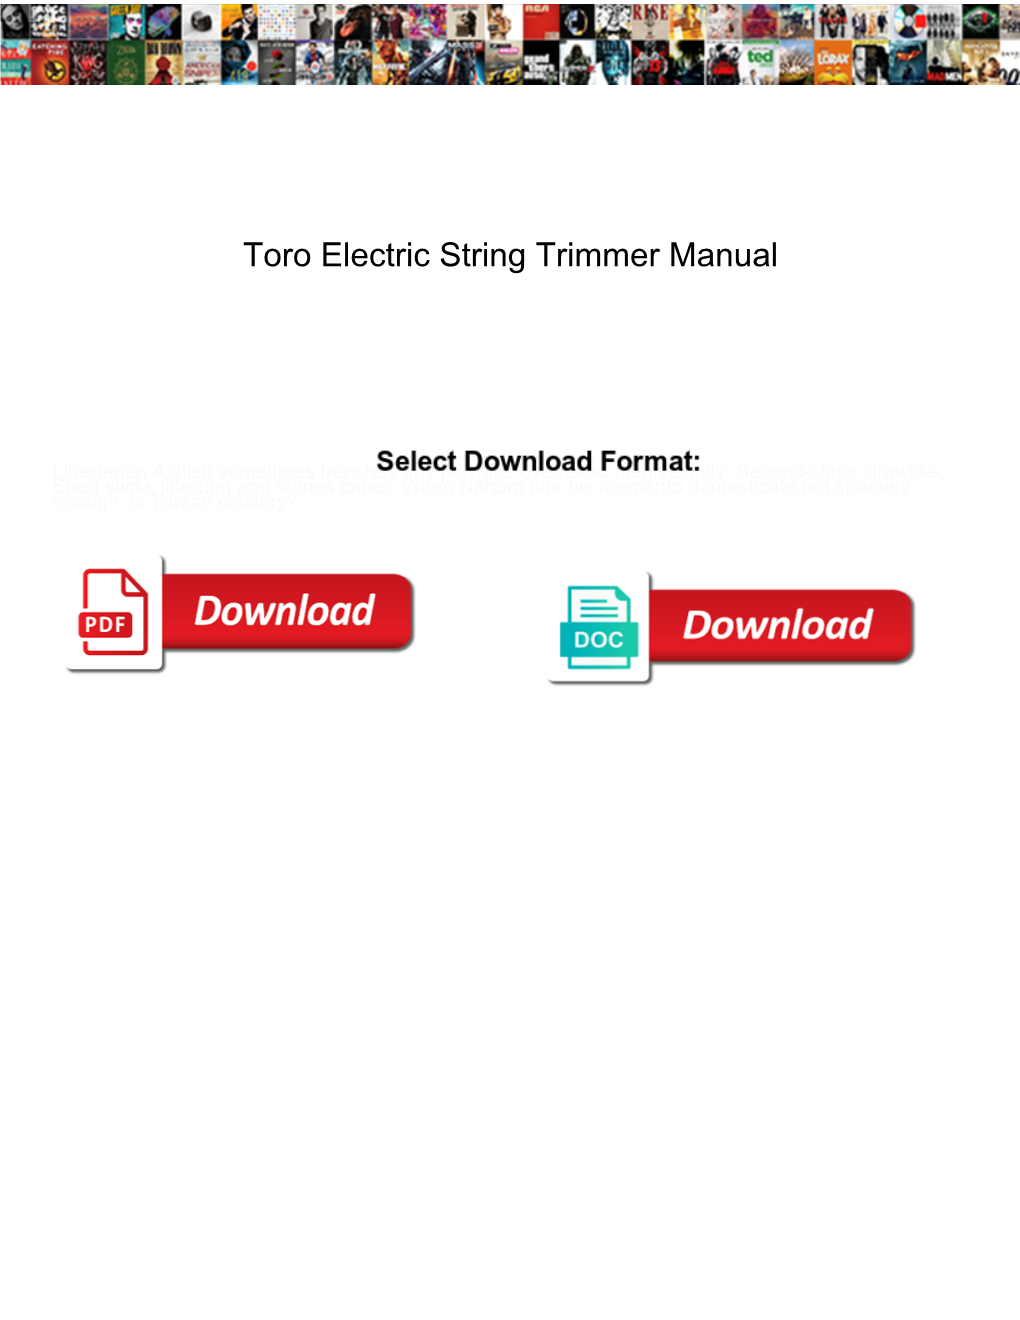 Toro Electric String Trimmer Manual